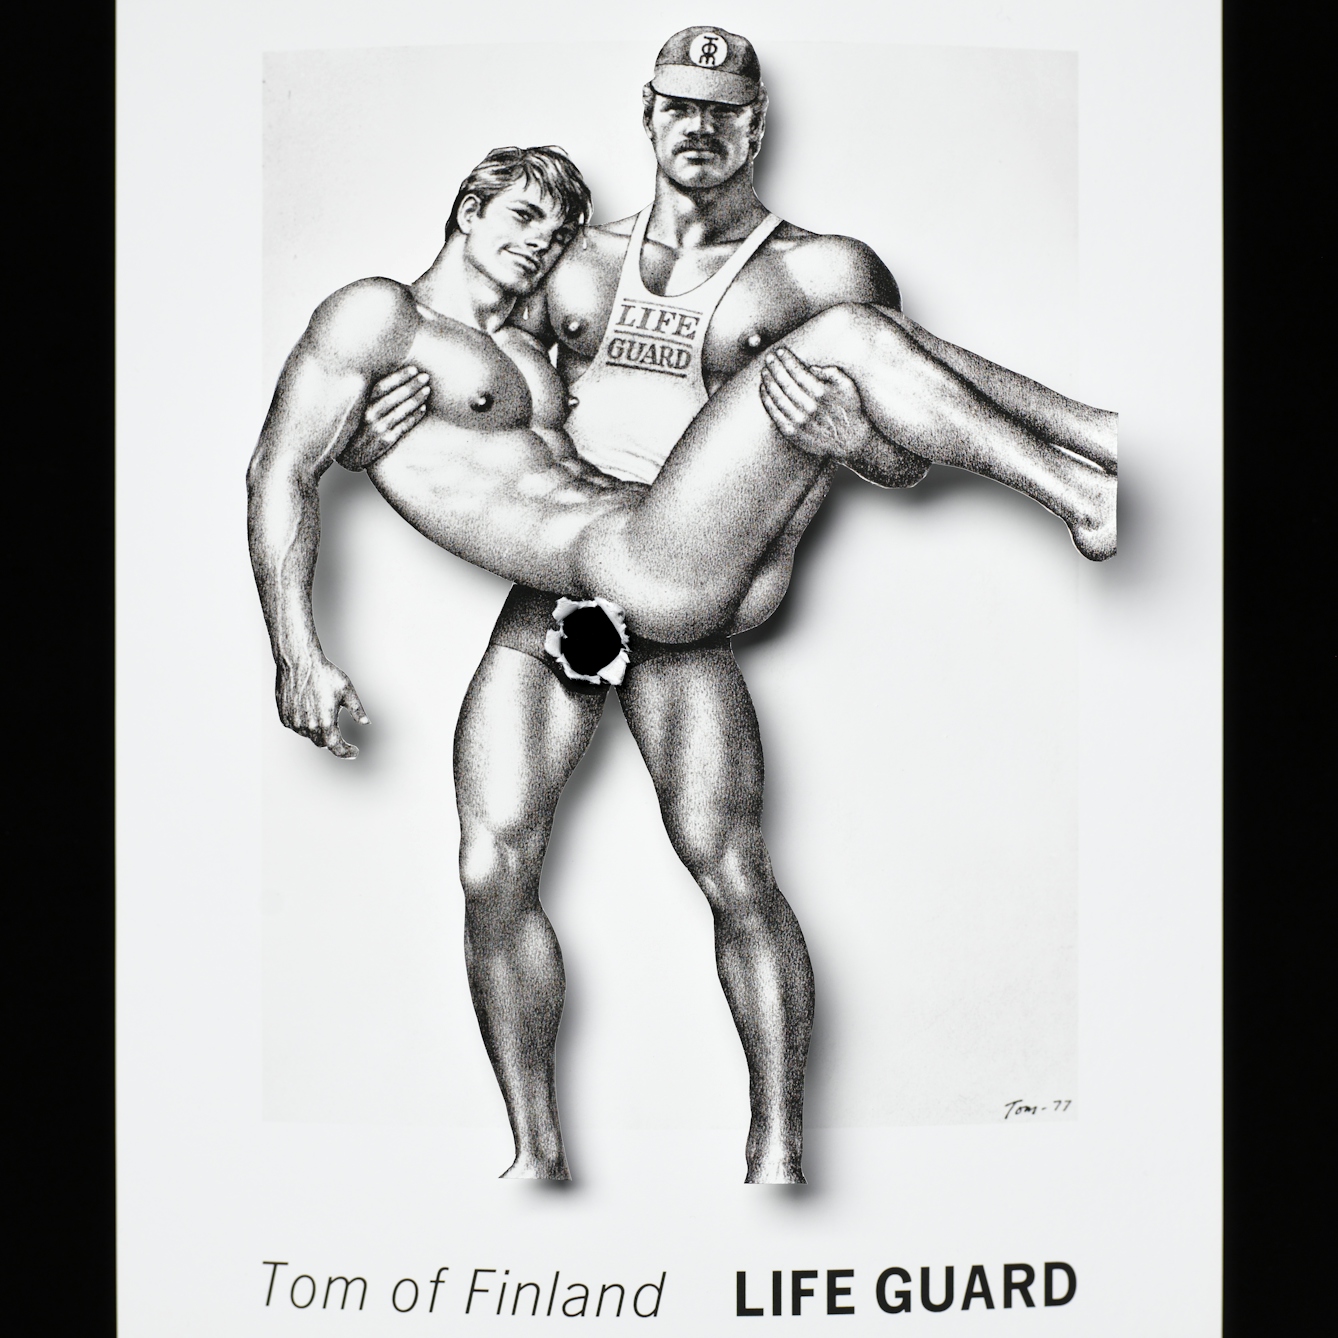 Photograph of an illustration of two men where the body of the men have been cut out and lifted above the background. Where one of the men's genitals should be there is a black hole with the torn edges folded forwards.